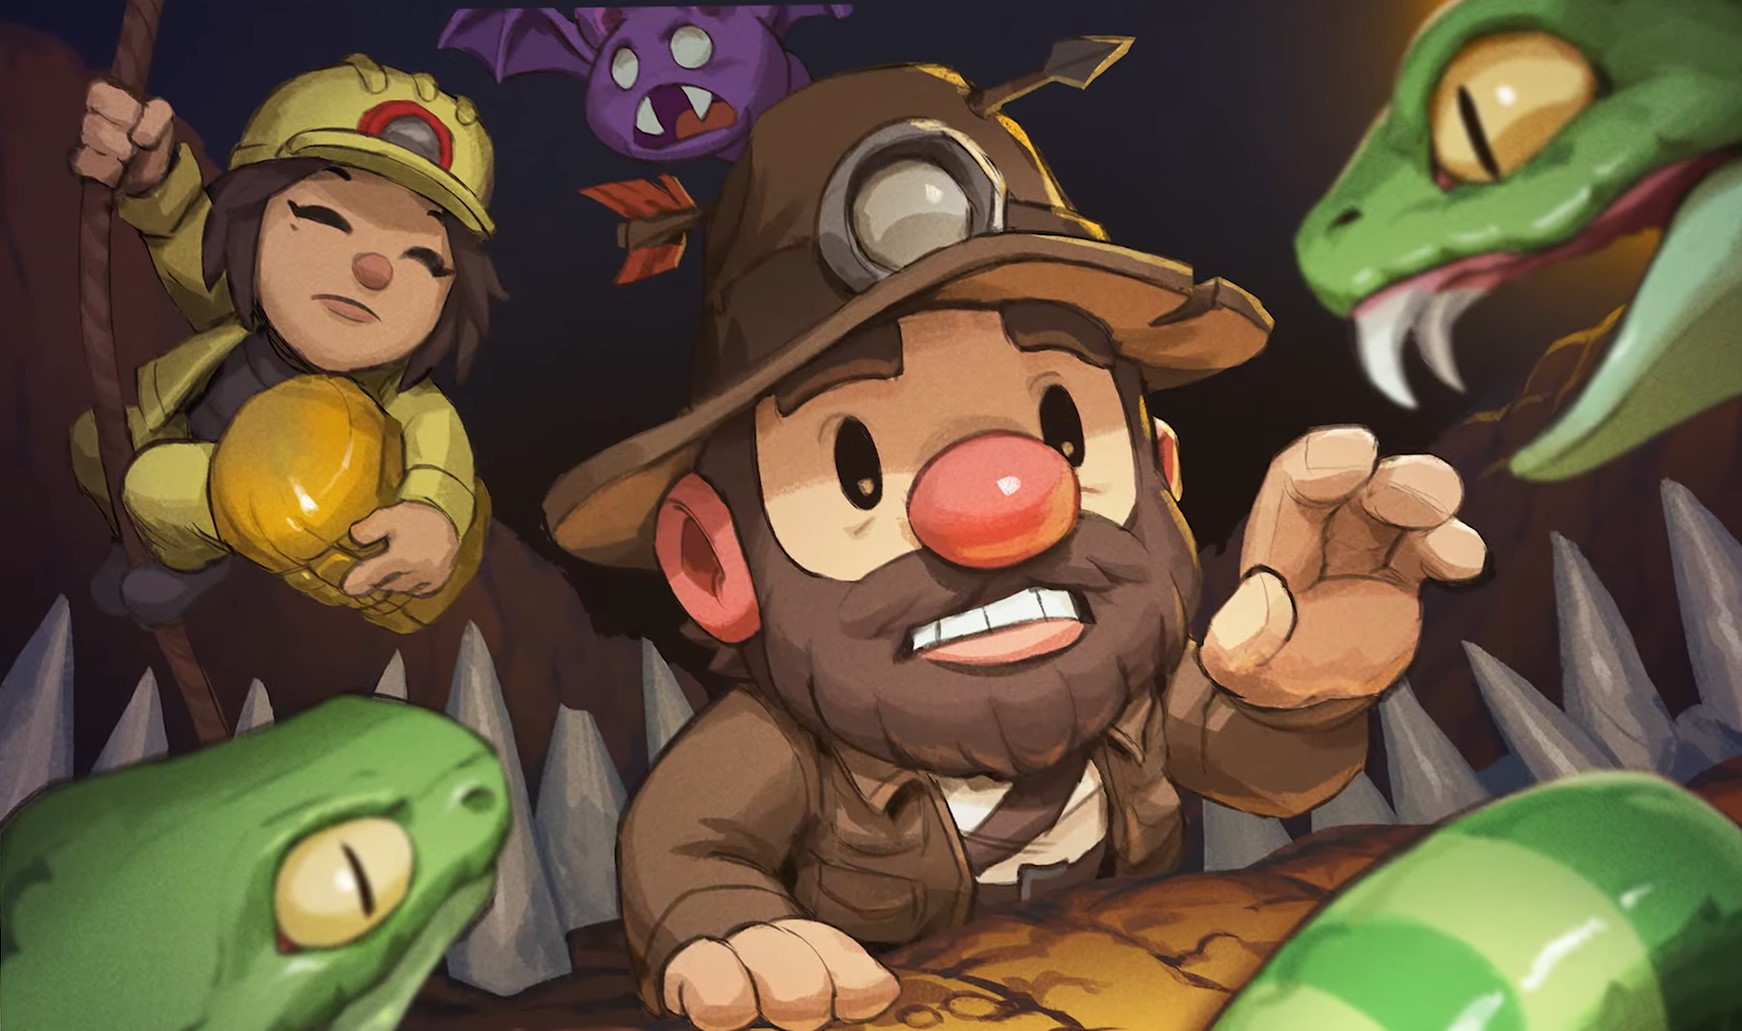  Spelunky 2 online multiplayer is now live on PC 